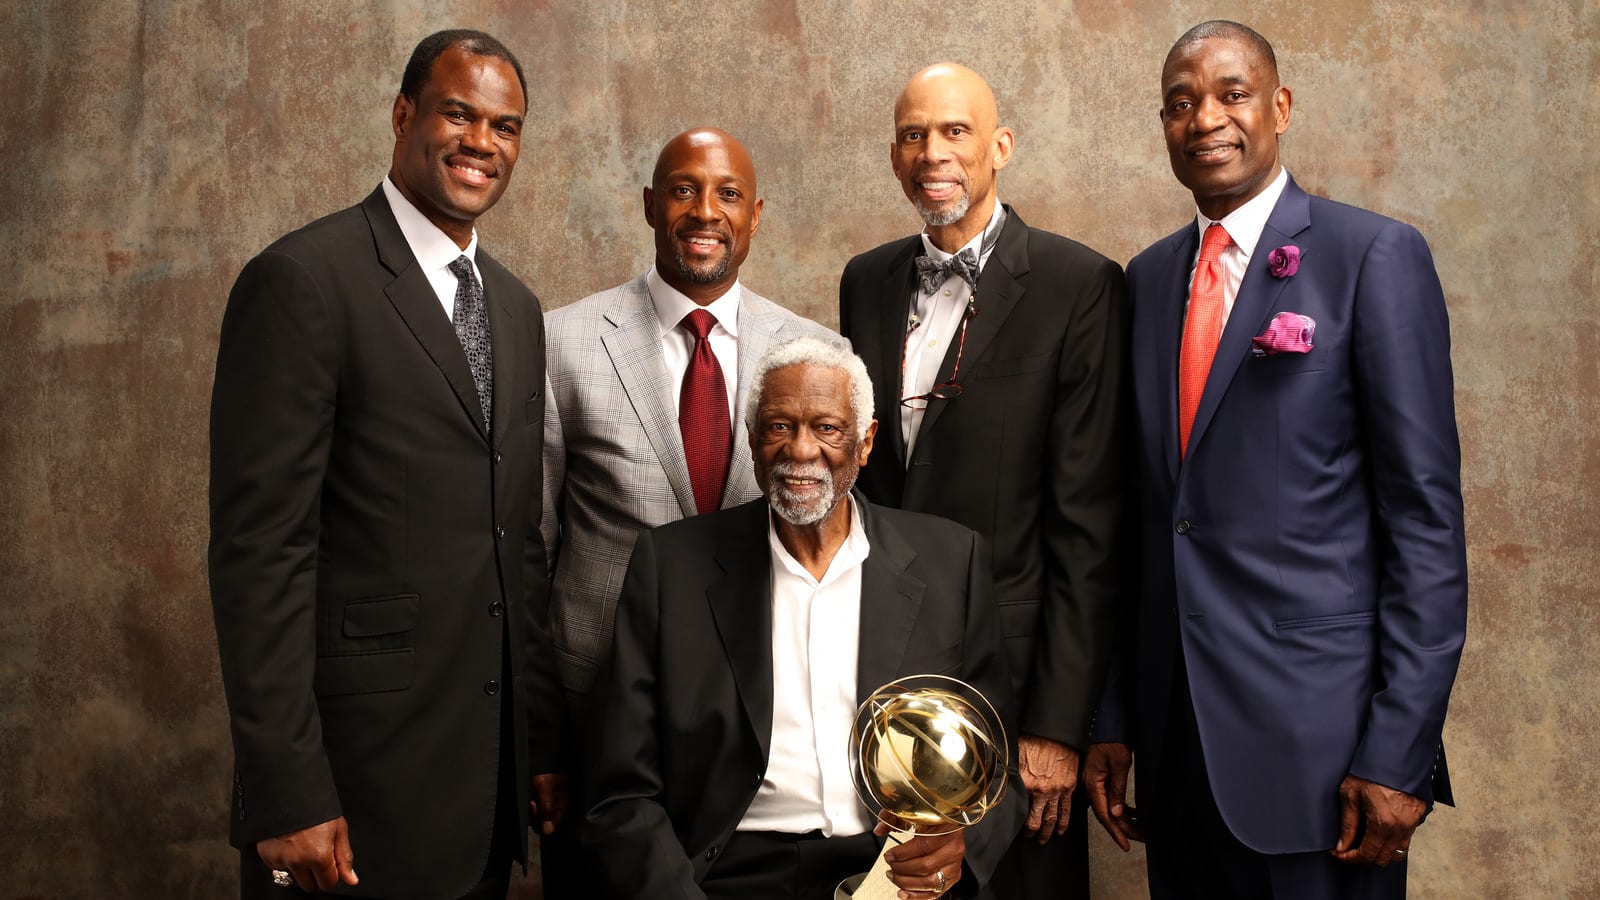 Bill Russell delivers epic line after winning NBA lifetime achievement award